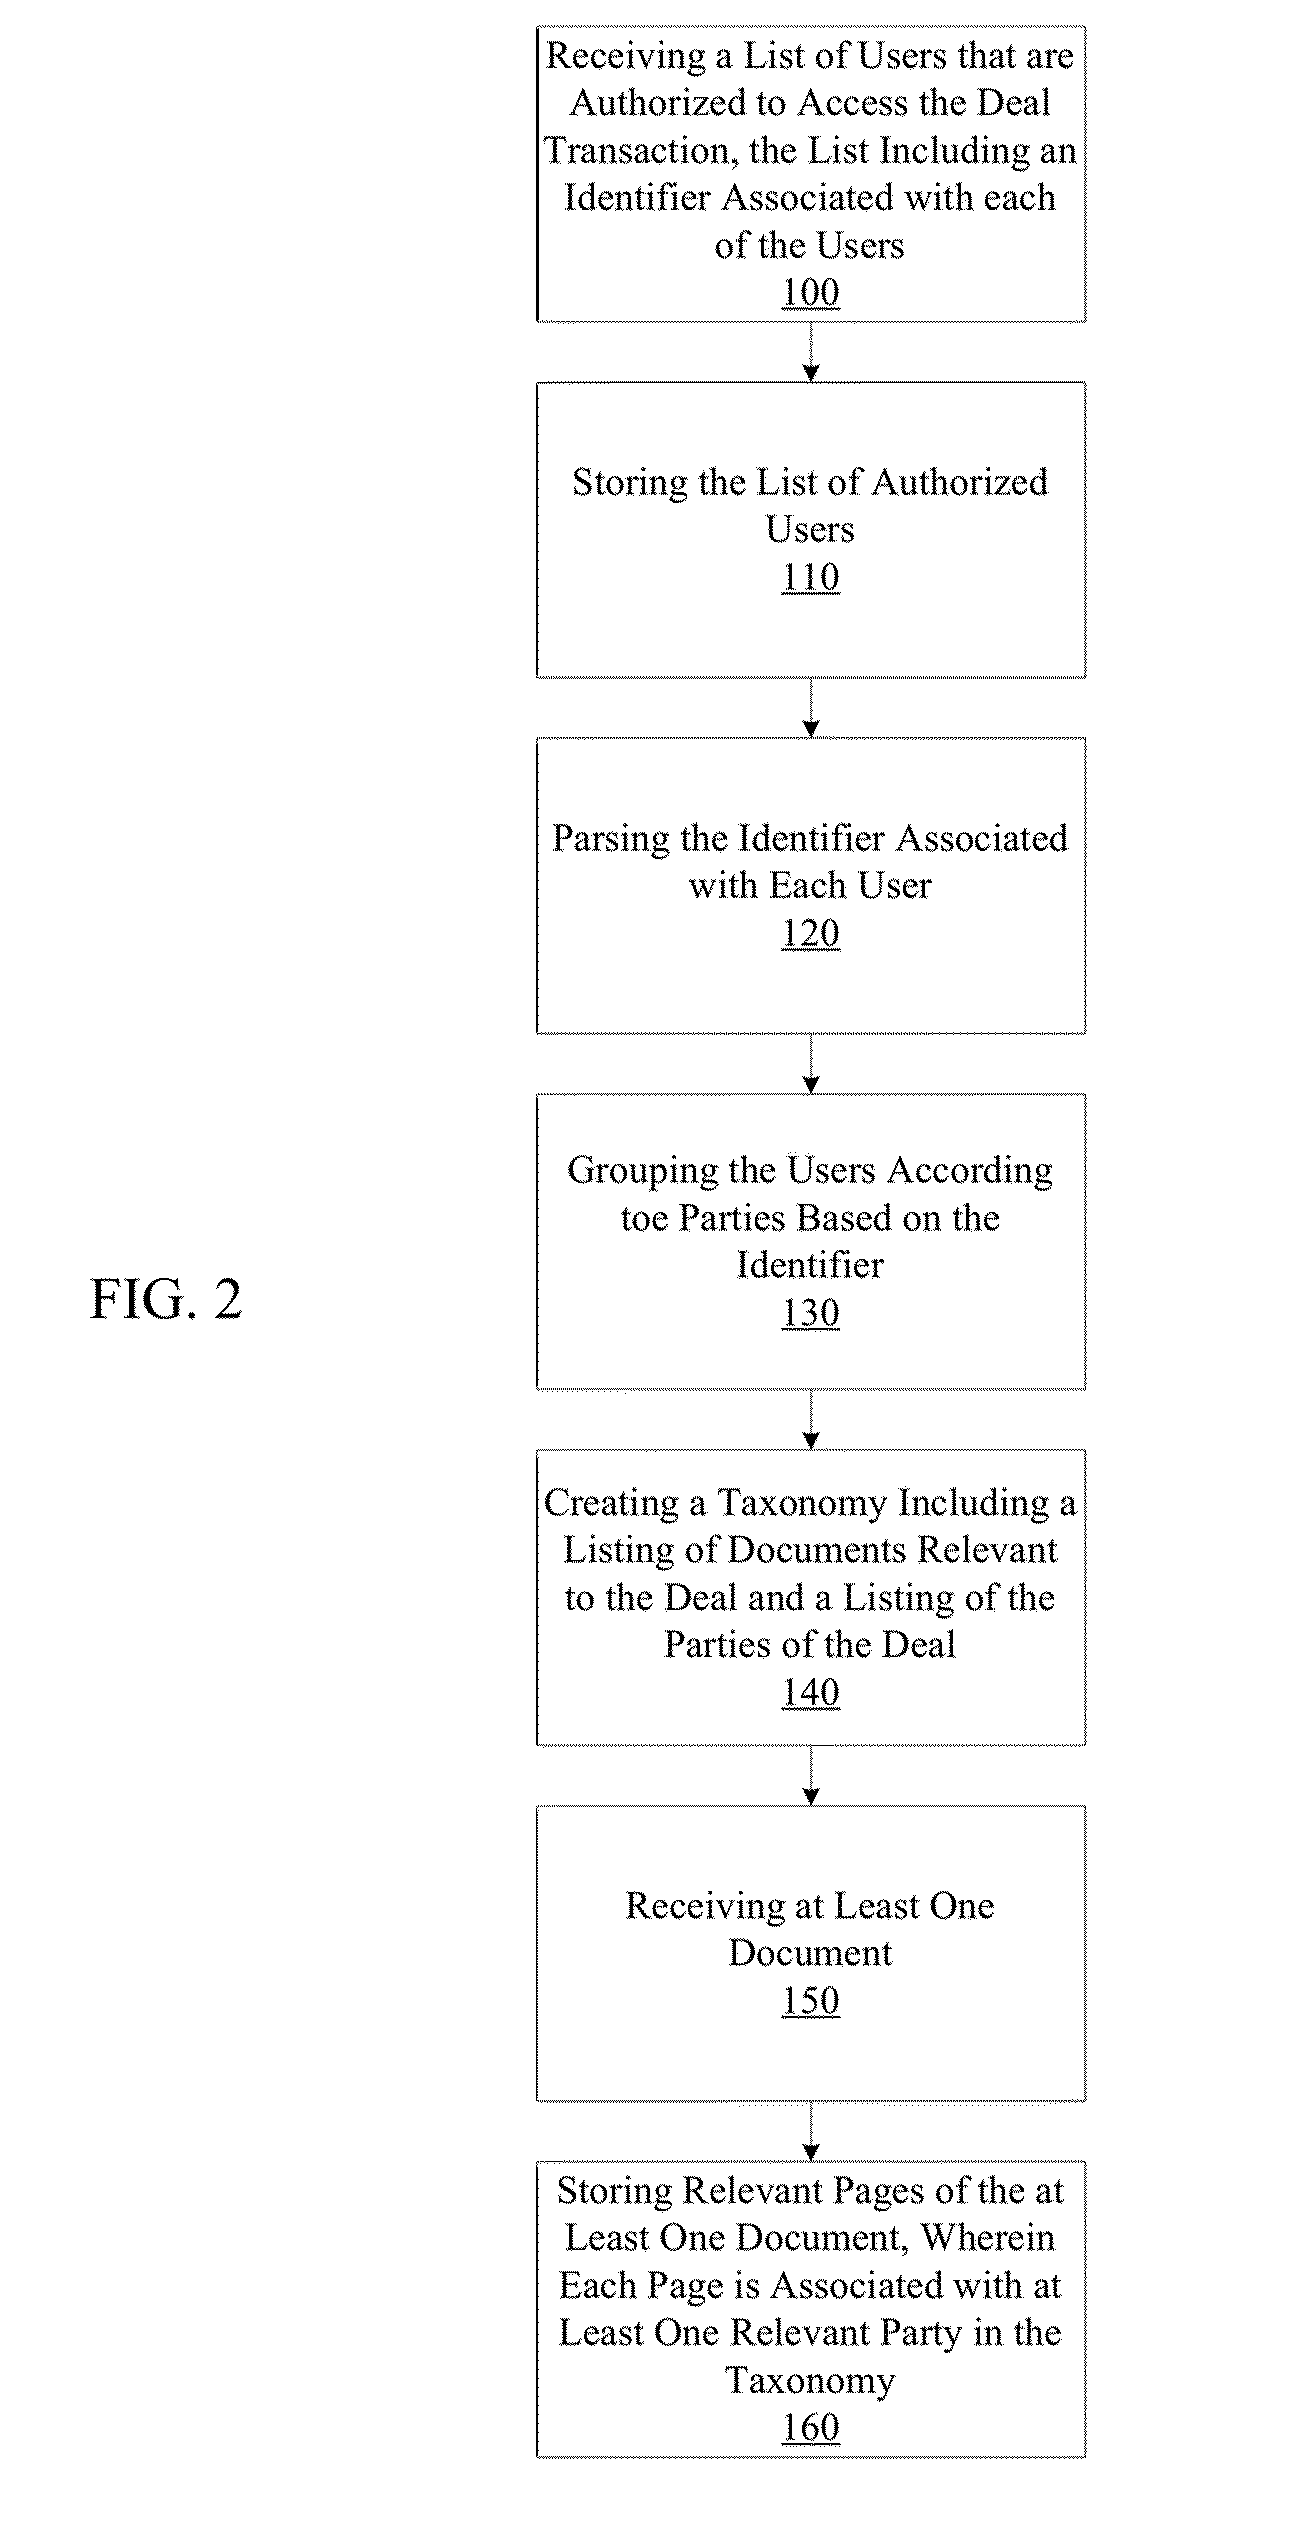 Managing signature pages of a transactional deal using a taxonomy displayable by a computing device